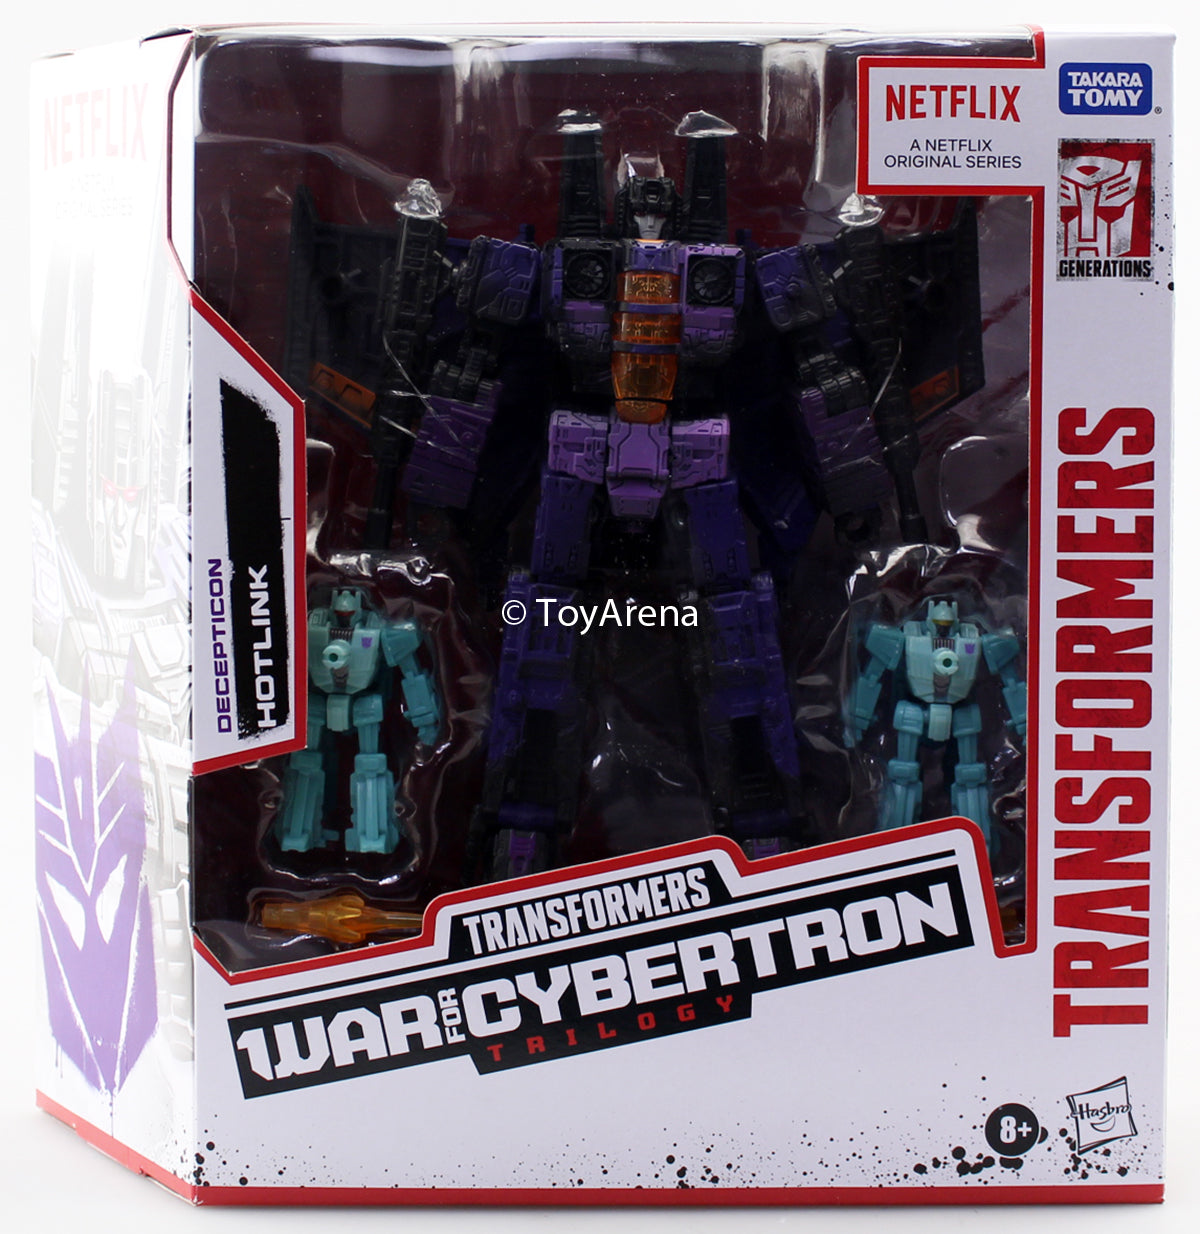 Hasbro Transformers War for Cybertron Netflix Hotlink Voyager 3-Pack Action Figure